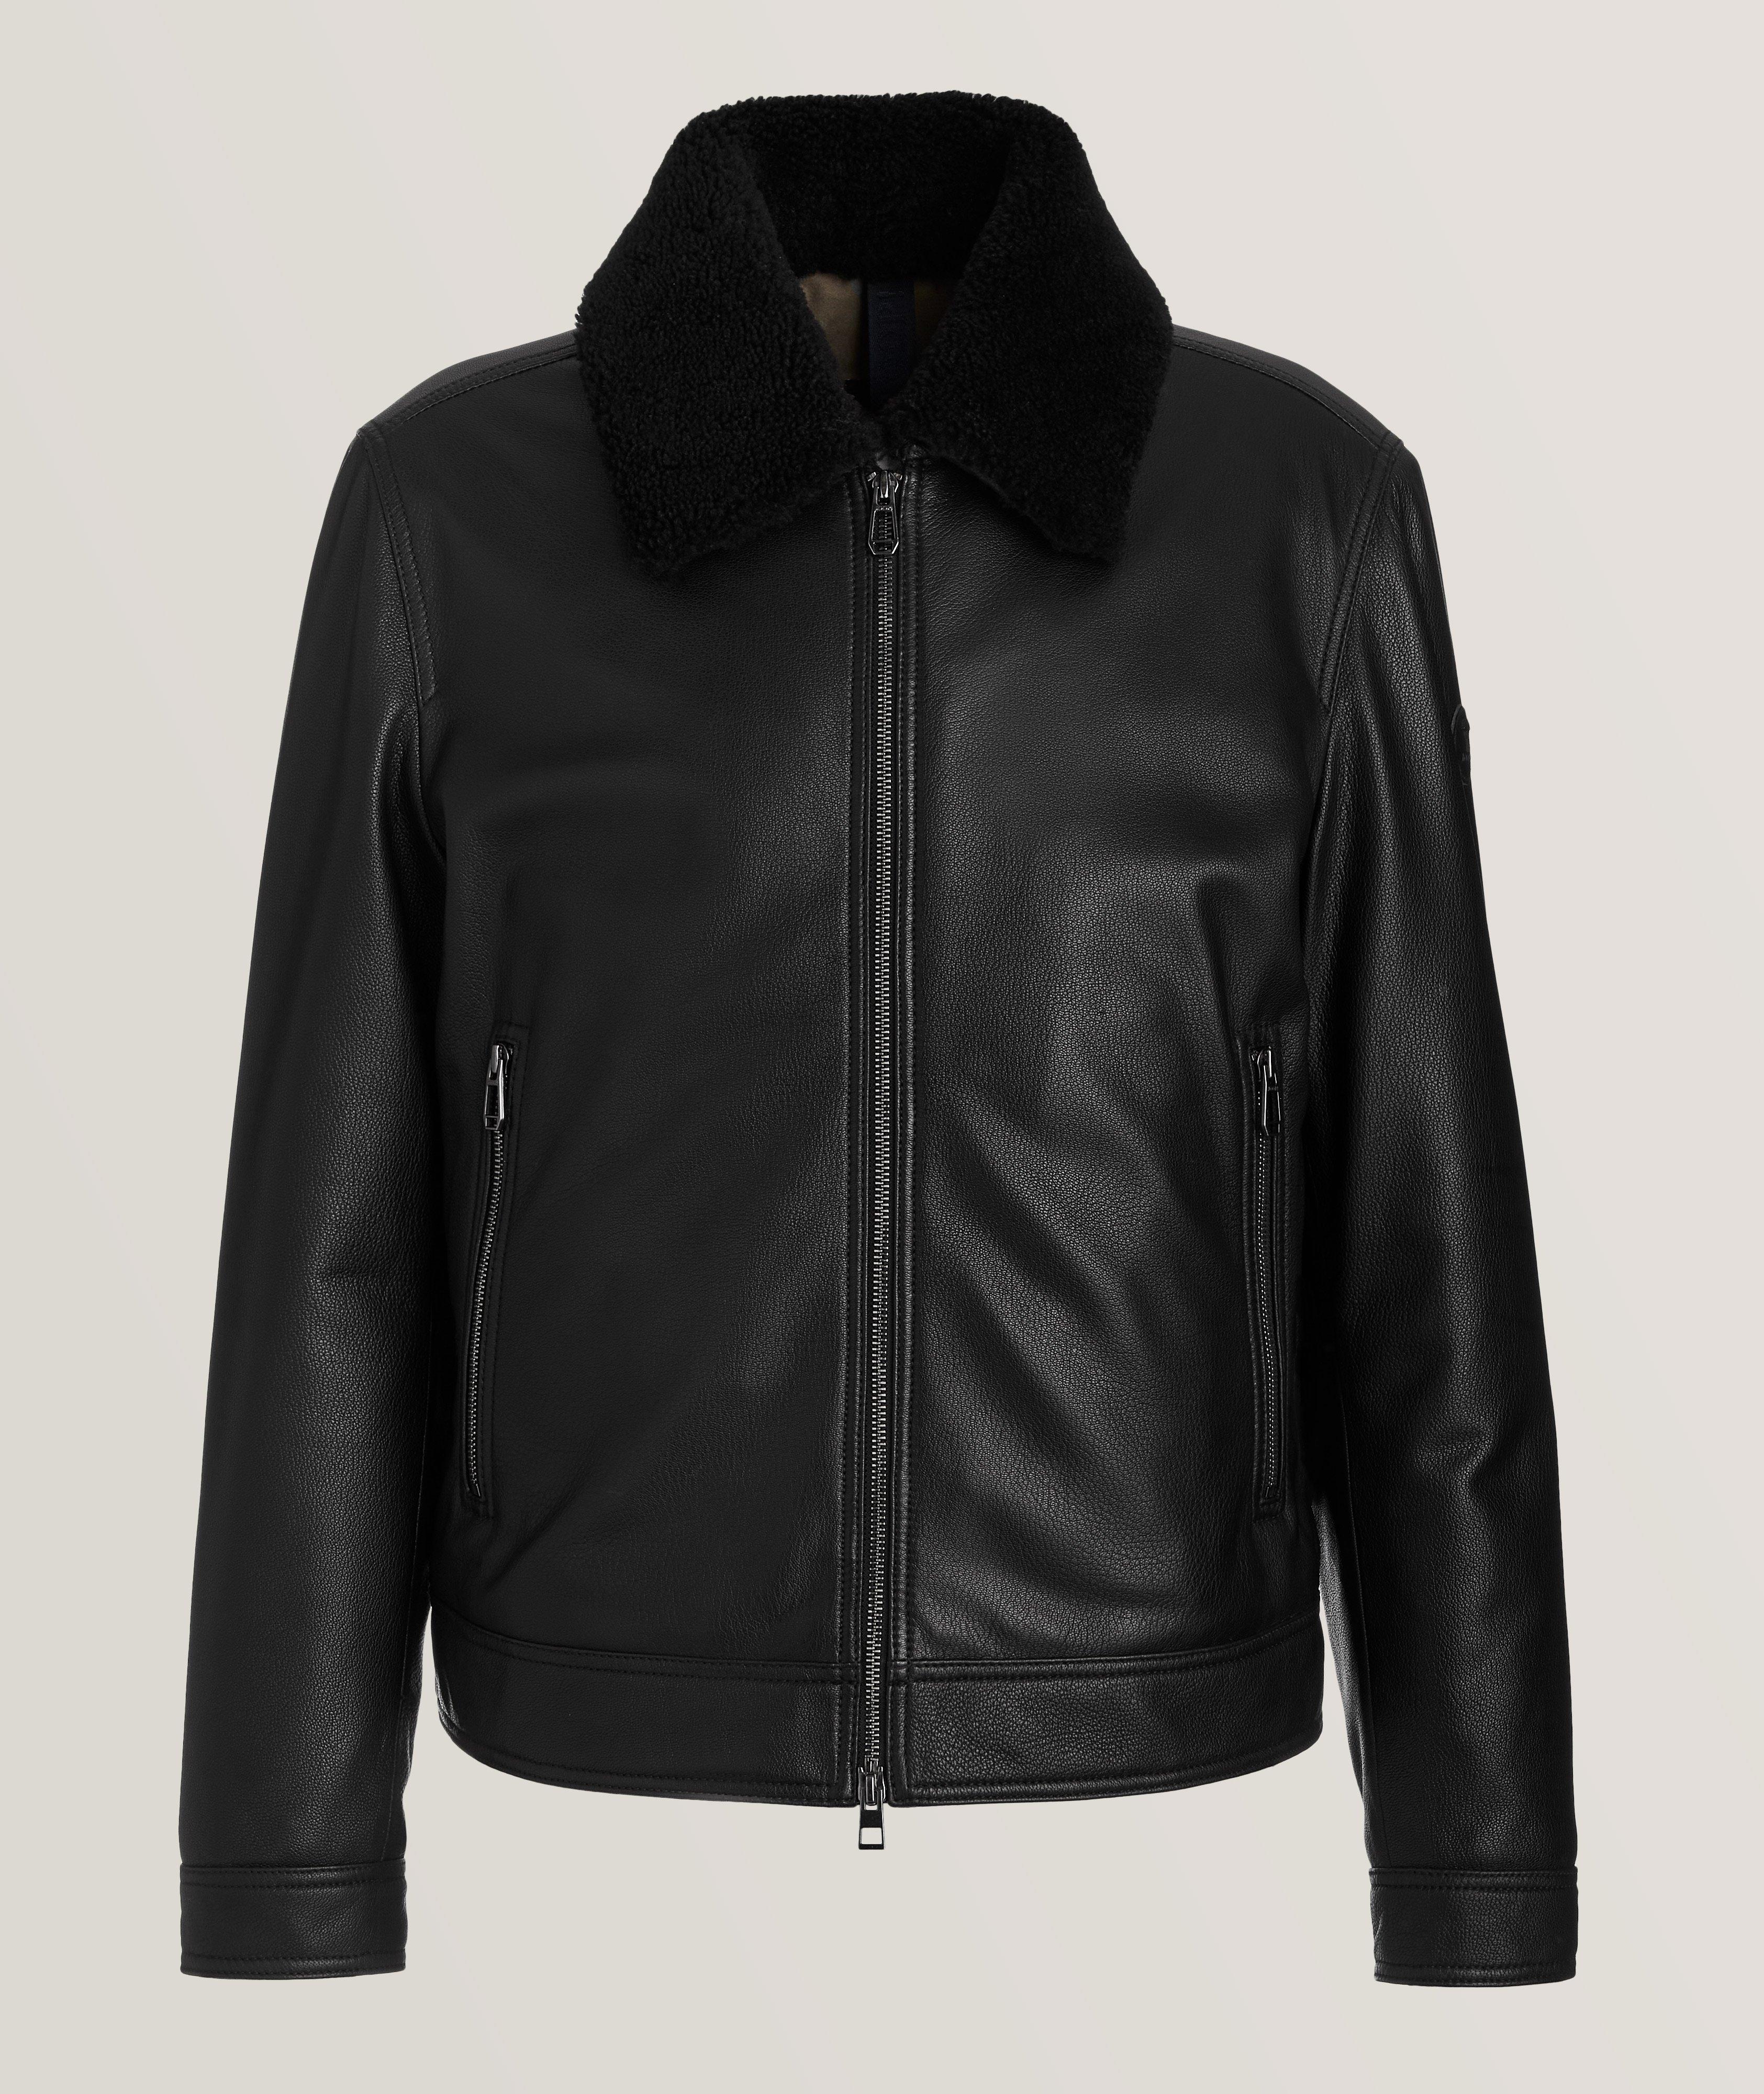 Two-Way Zip Leather Shearling Jacket image 0